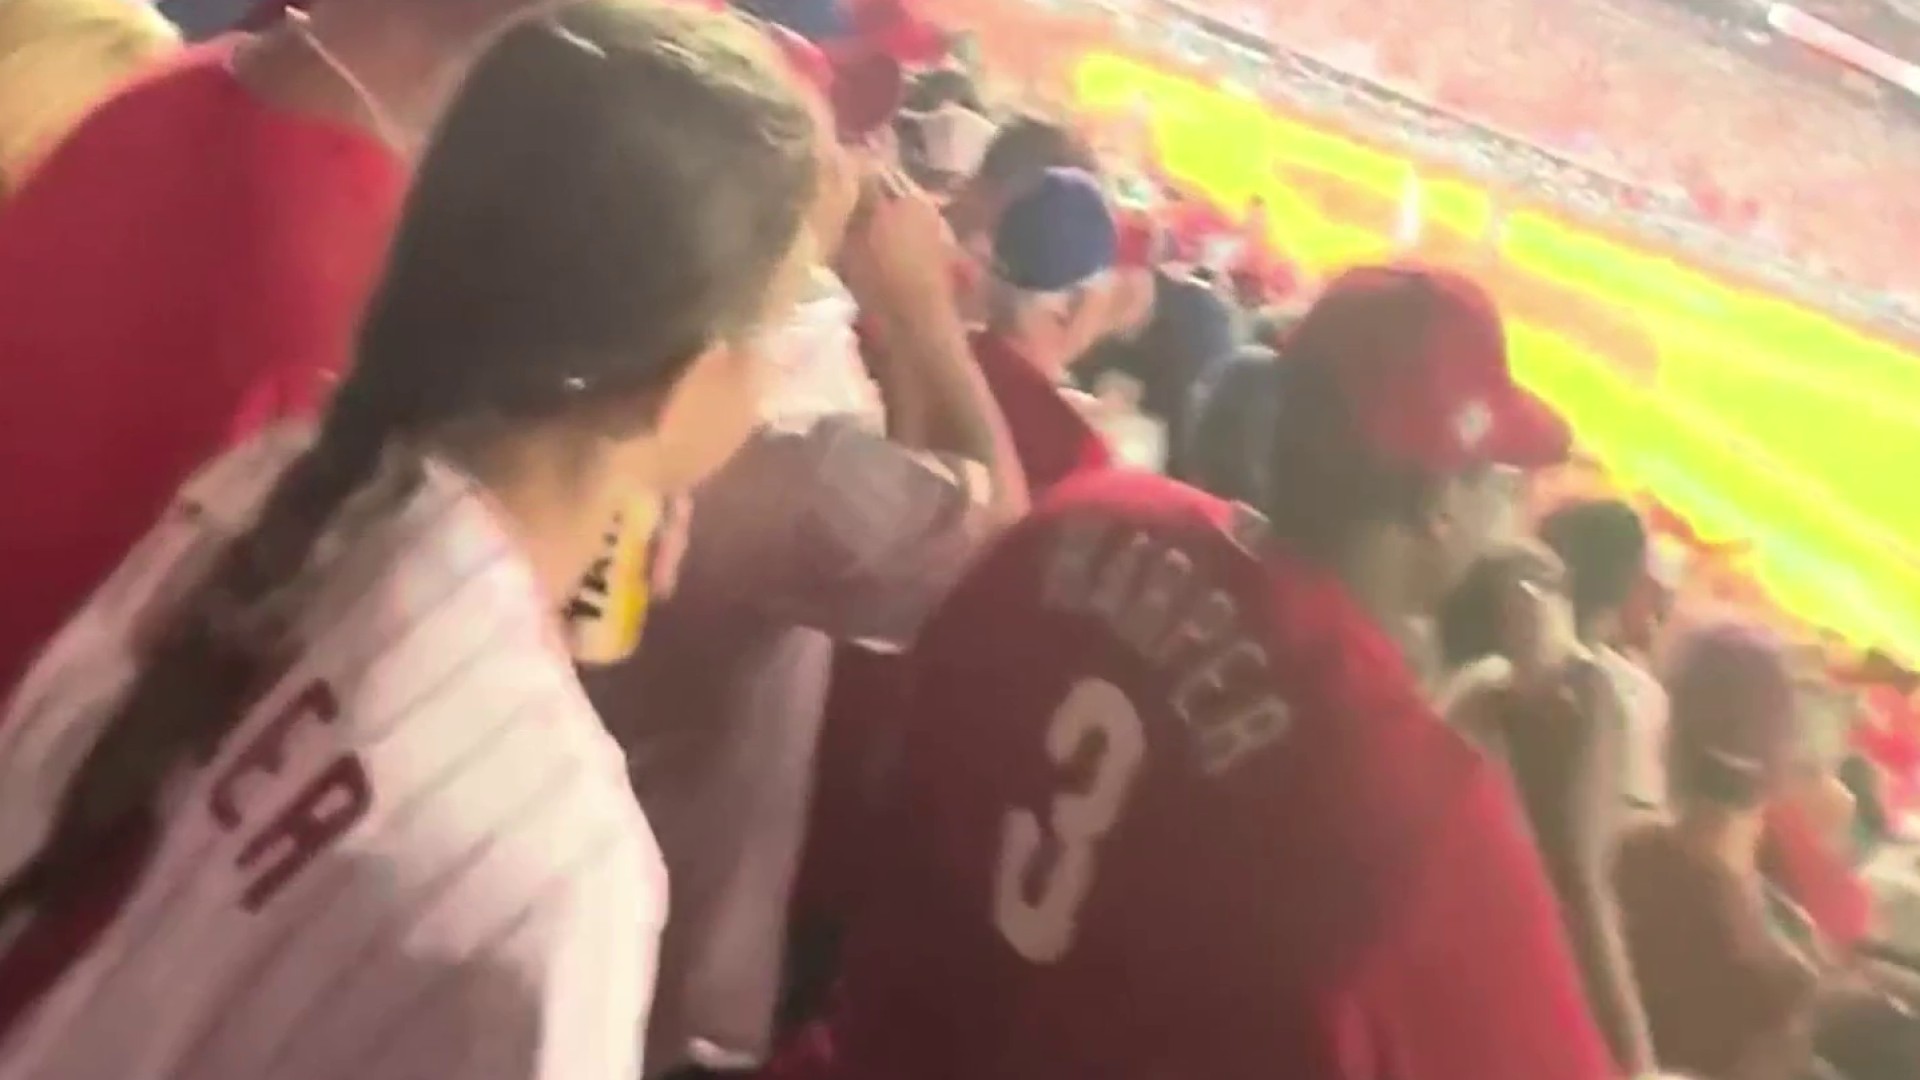 We're back baby: Fans are pumped after Phillies advanced to NLCS